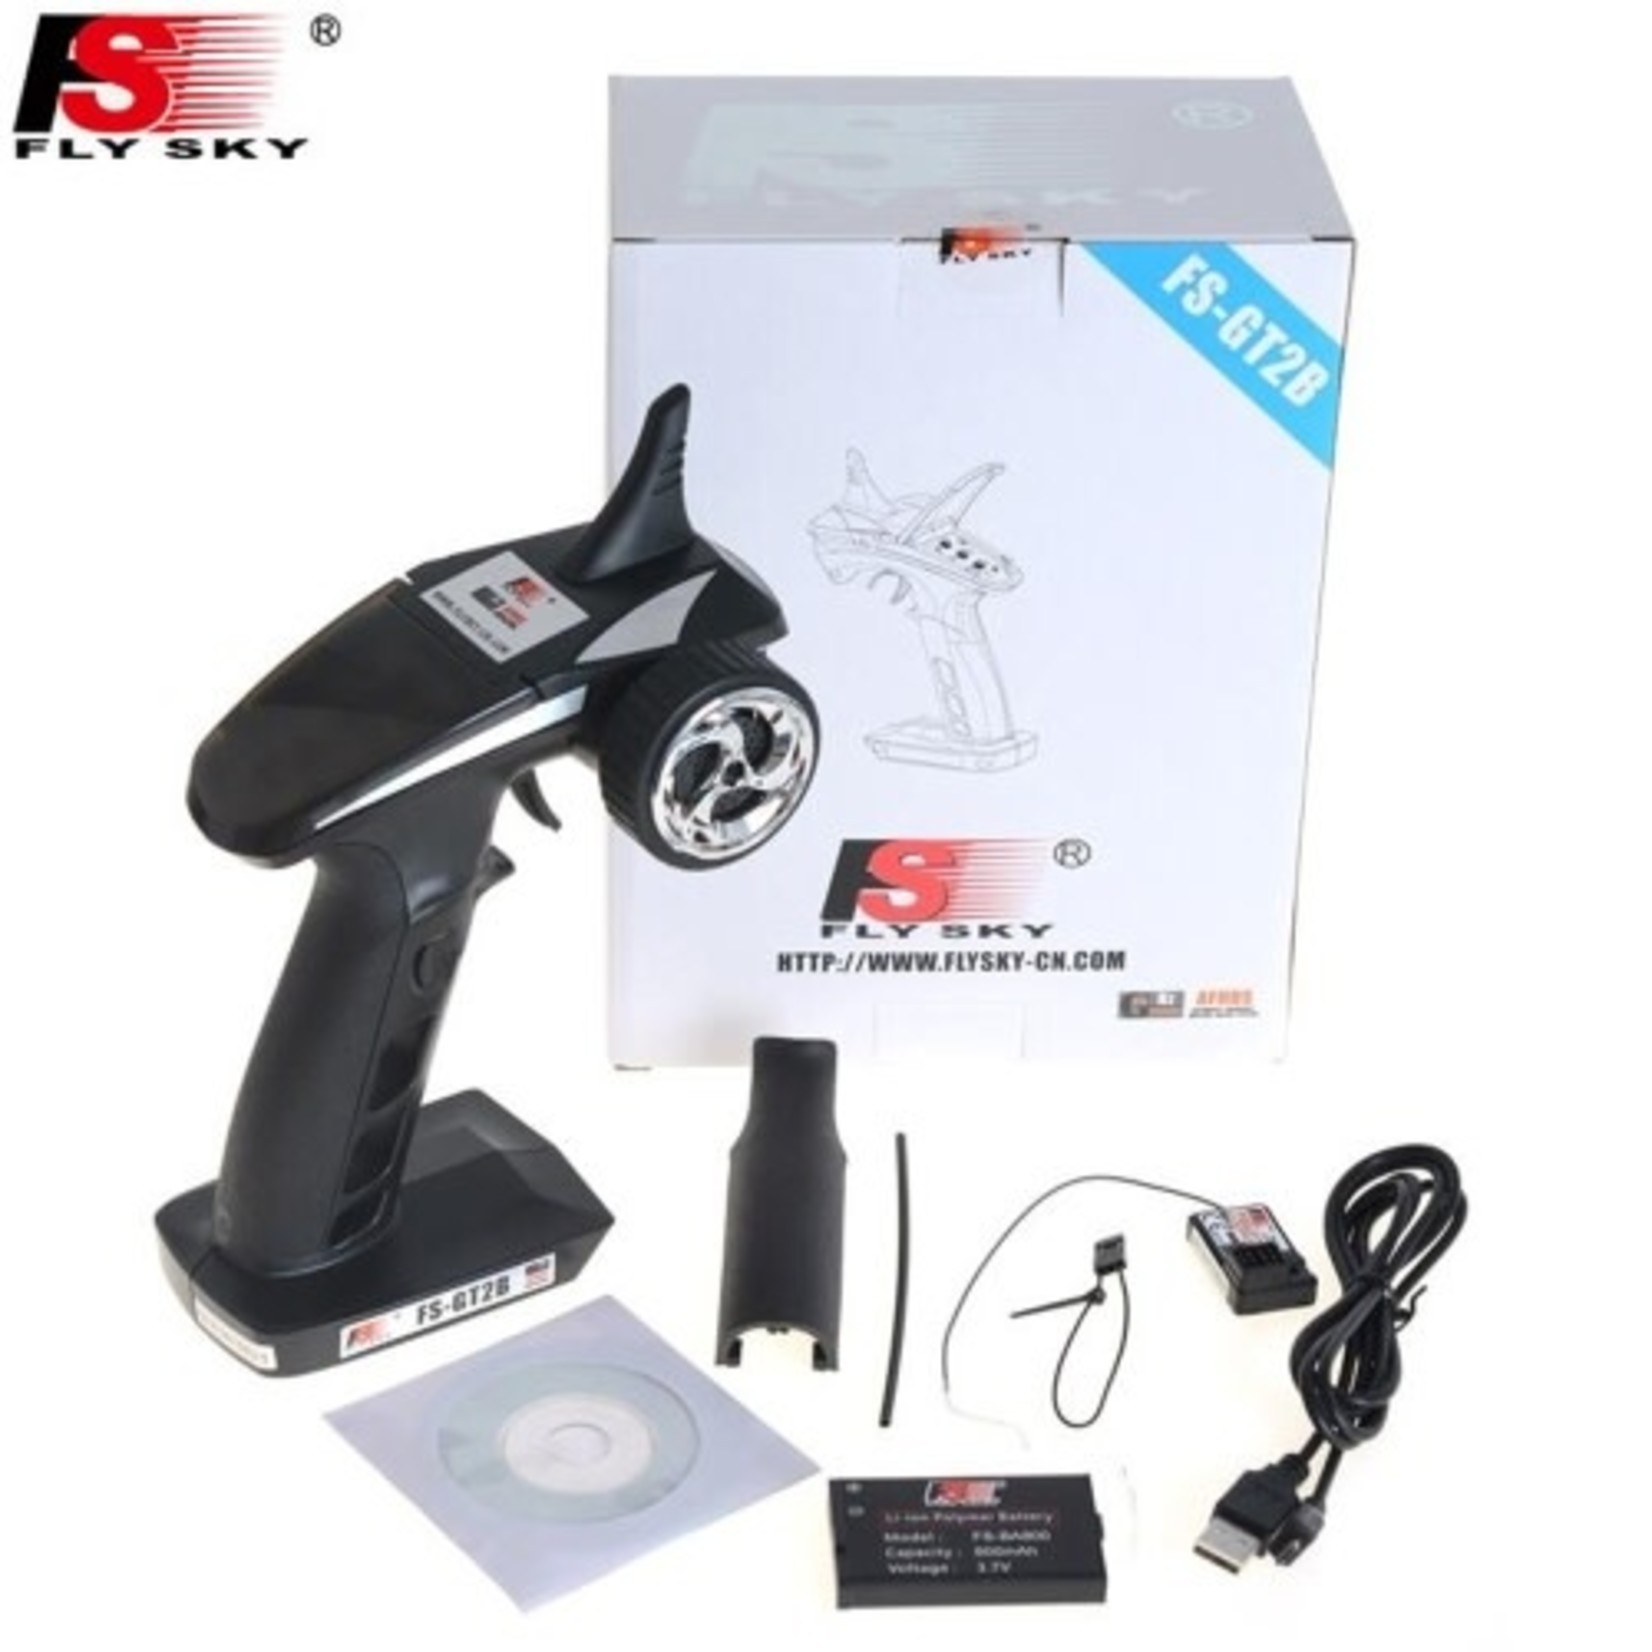 Flysky GT2B 3 channel transmitter and receiver